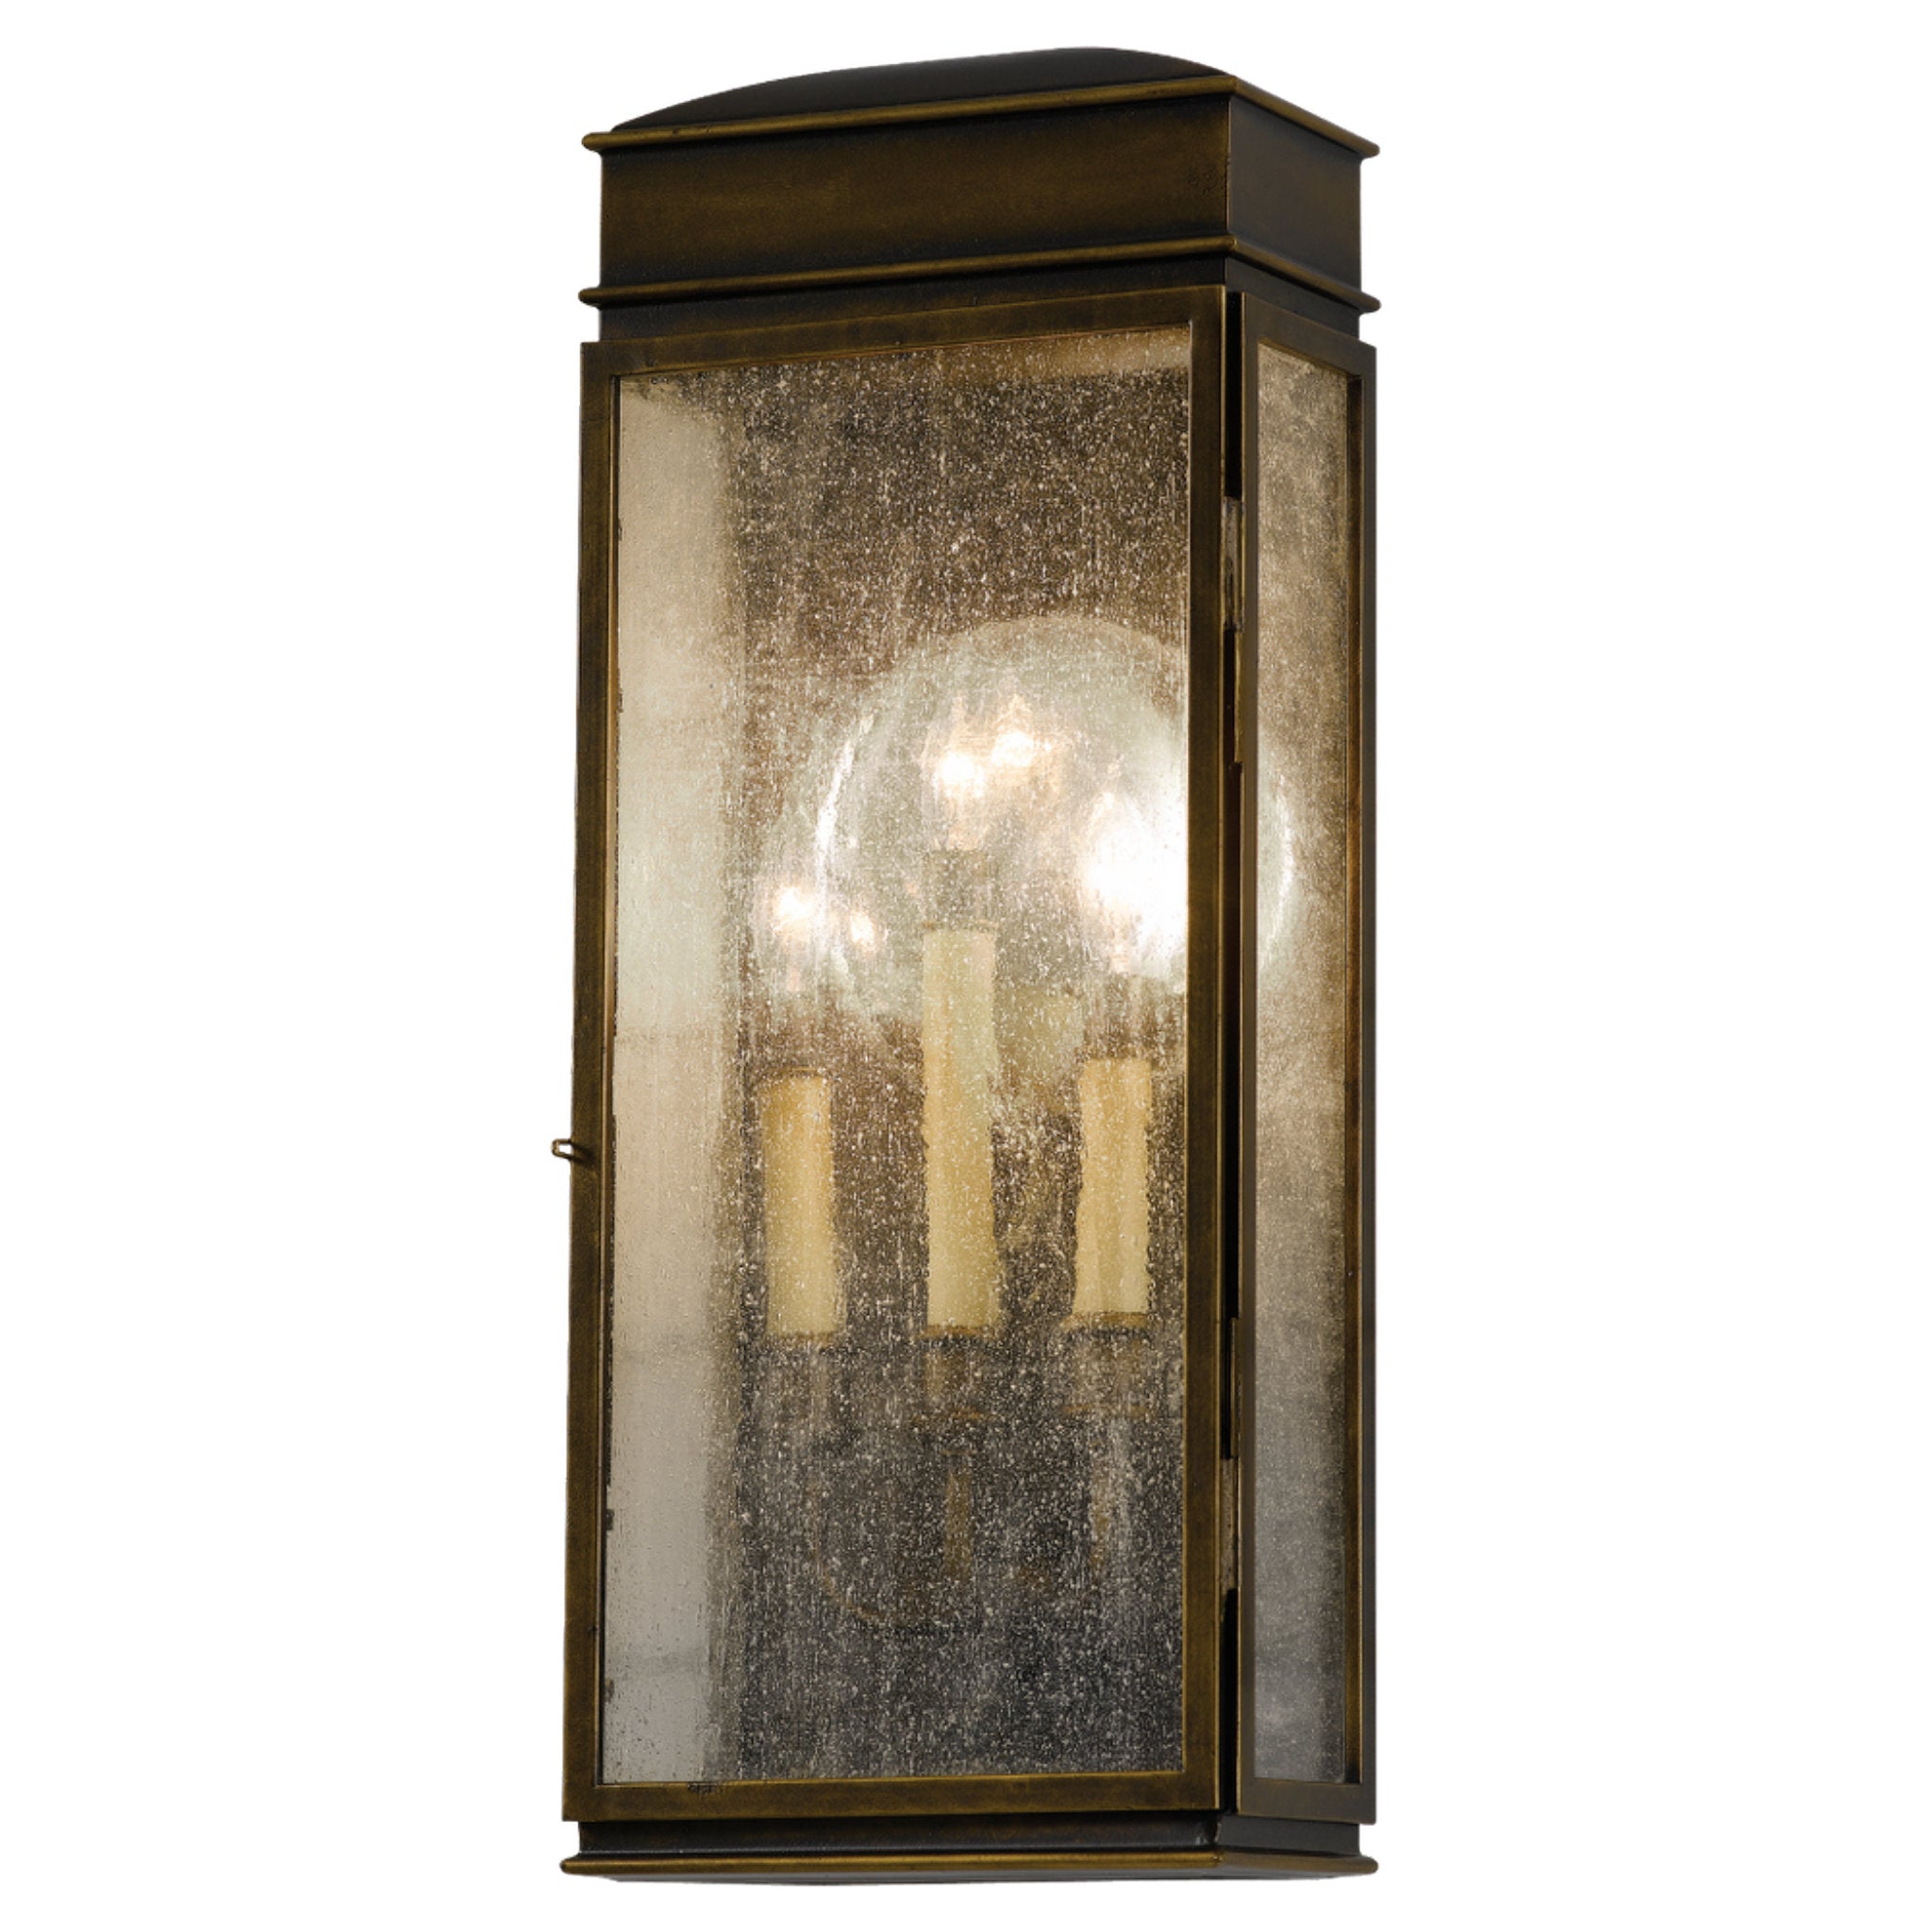 Whitaker Large Lantern Traditional Outdoor Fixture 9" Width 22.5" Height Powder Coated Steel Clear Seeded Shade in Astral Bronze